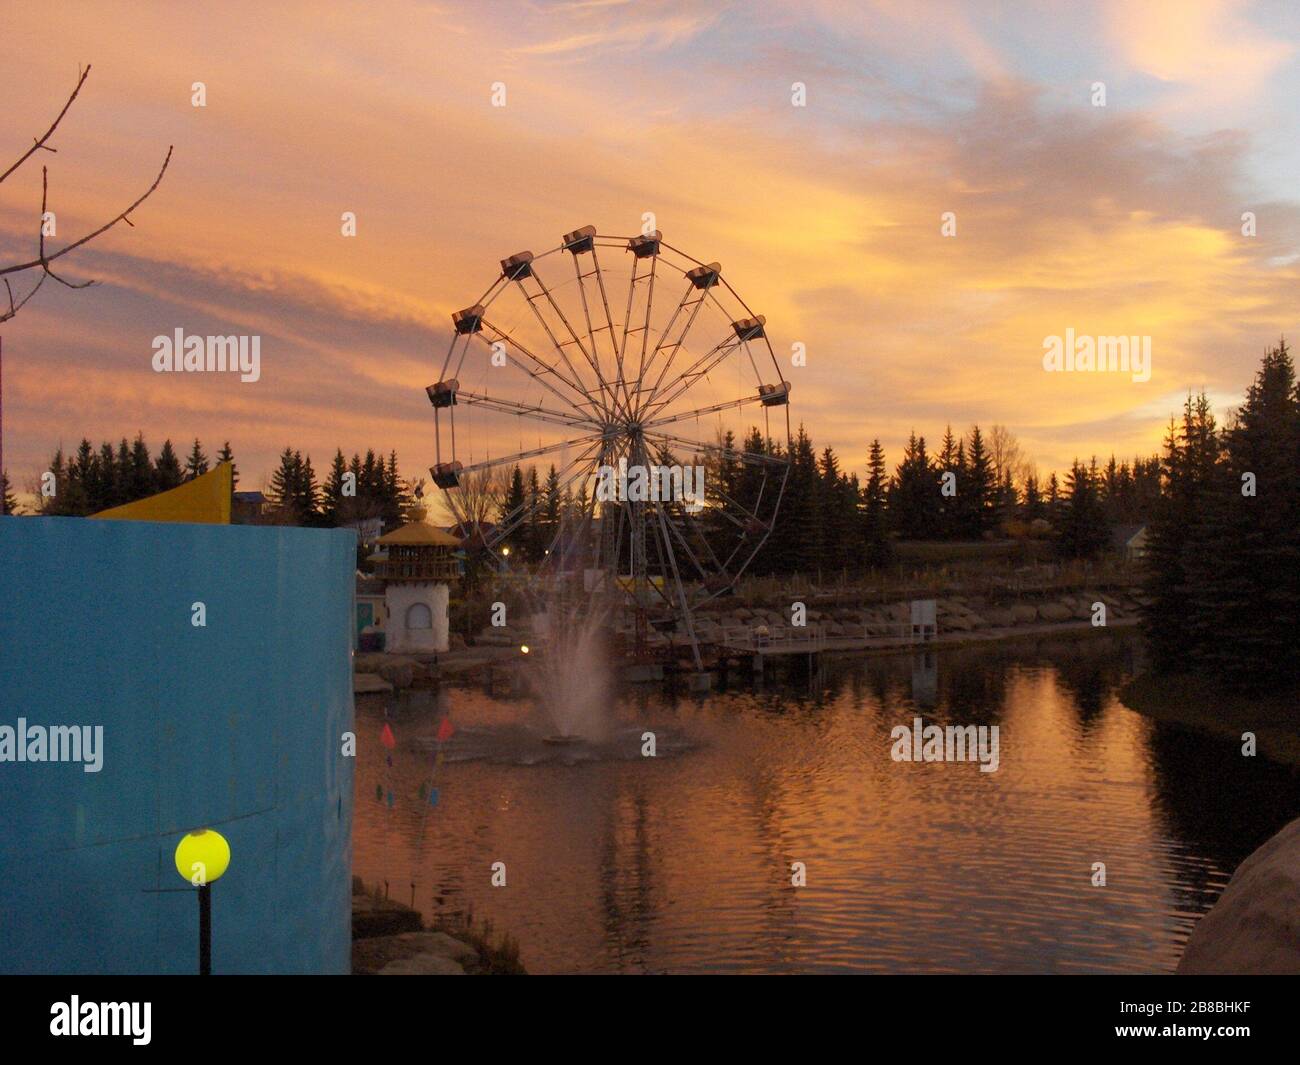 'English: Calaway Park (Calgary, Canada) - Big Eli (Calaway's name for their Ferris Wheel) in front of a sunset. Also shown are the Twiz and Twirl Maze (left) and Mulligan’s Island Mini Golf (immediate left of Big Eli).; 9 October 2006; Picture shot by employee (ride operator) of Calaway; Jonathan Verge; ' Stock Photo